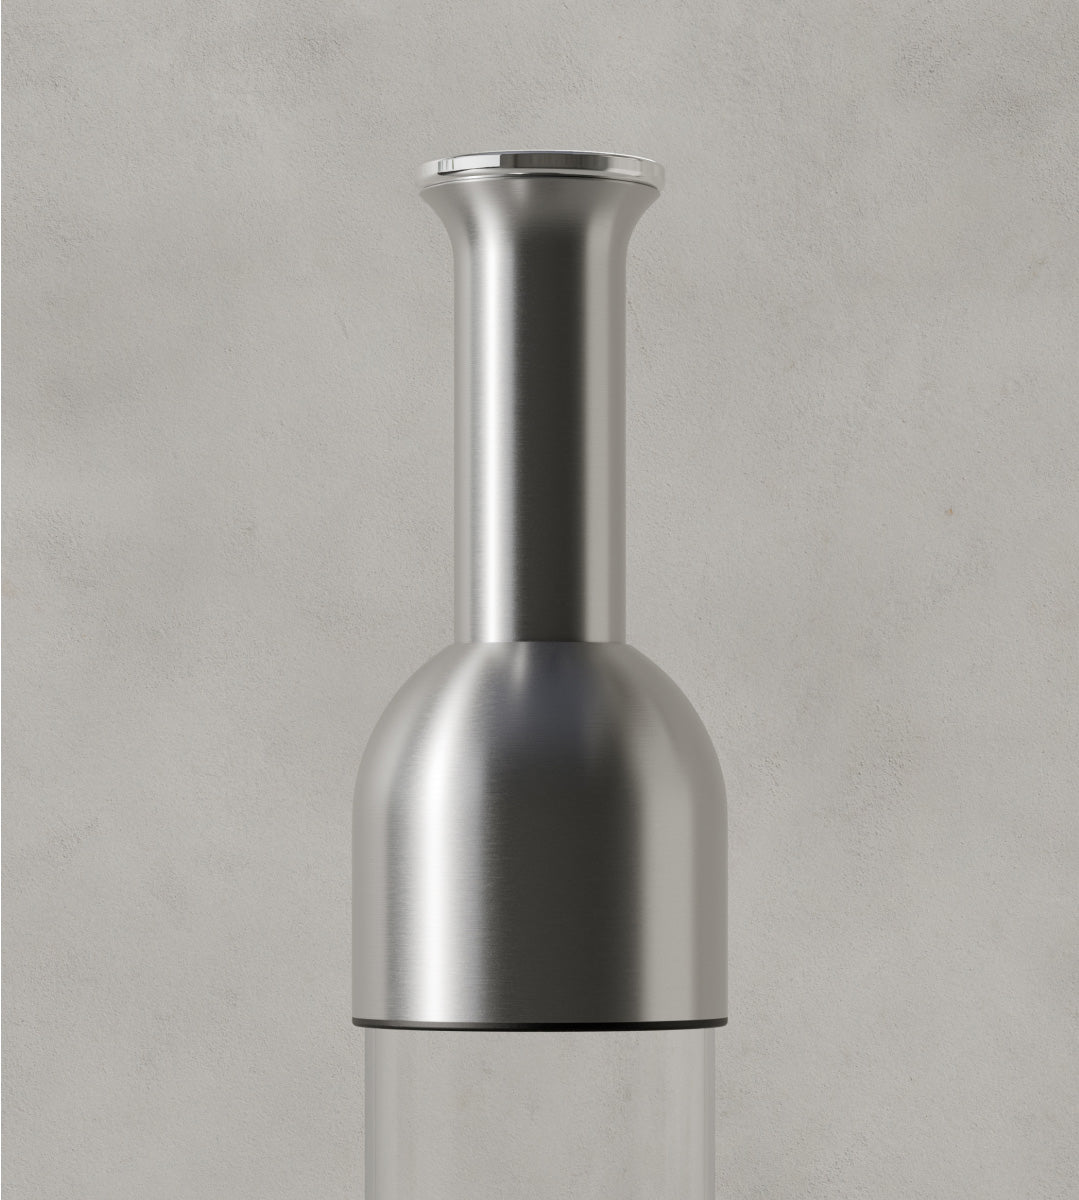 Details of the stainless satin eto wine decanter